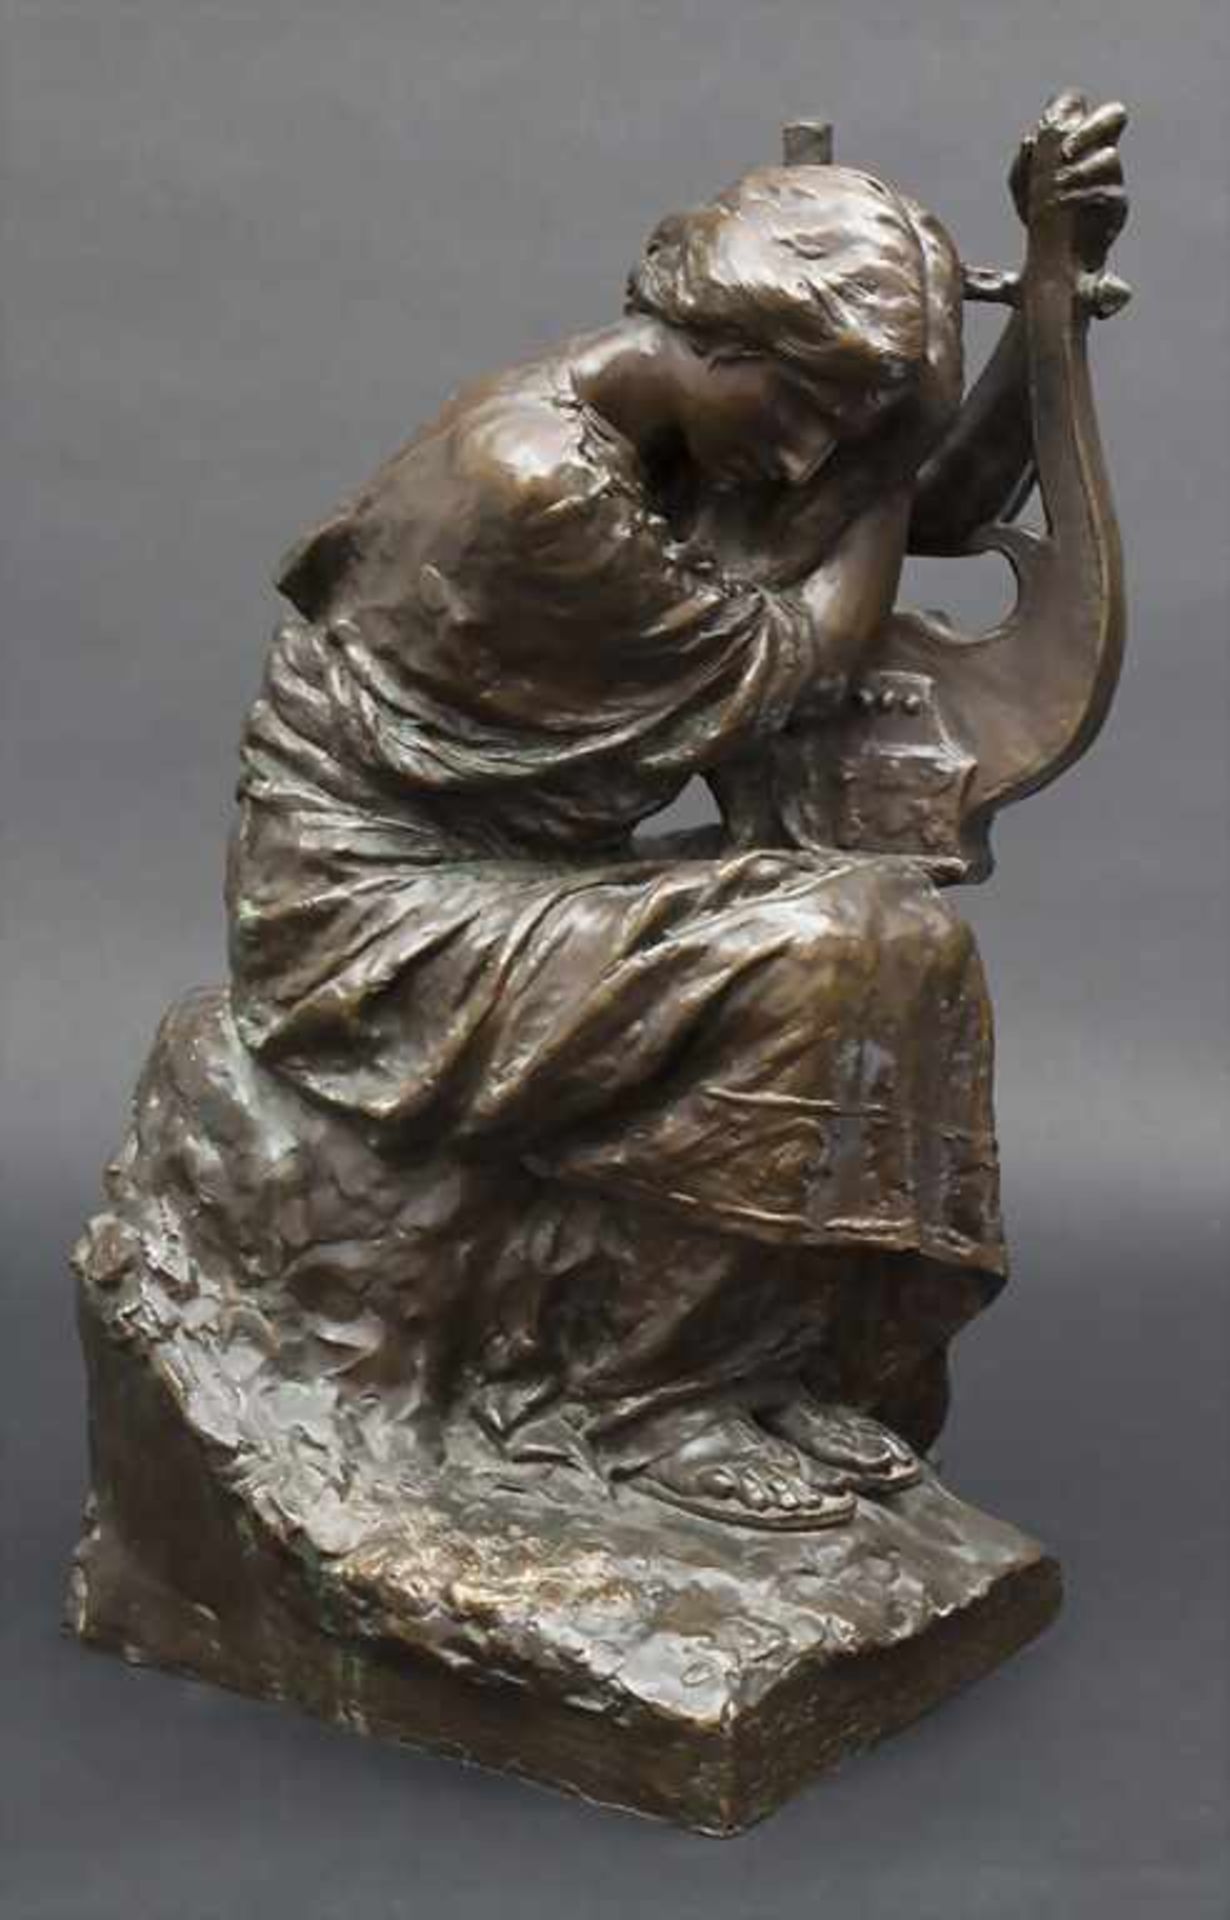 Vincenzo Alfano (1854-1917), Bronzefigur 'Junge Dame mit Lyra' / A bronze figure 'Young lady with